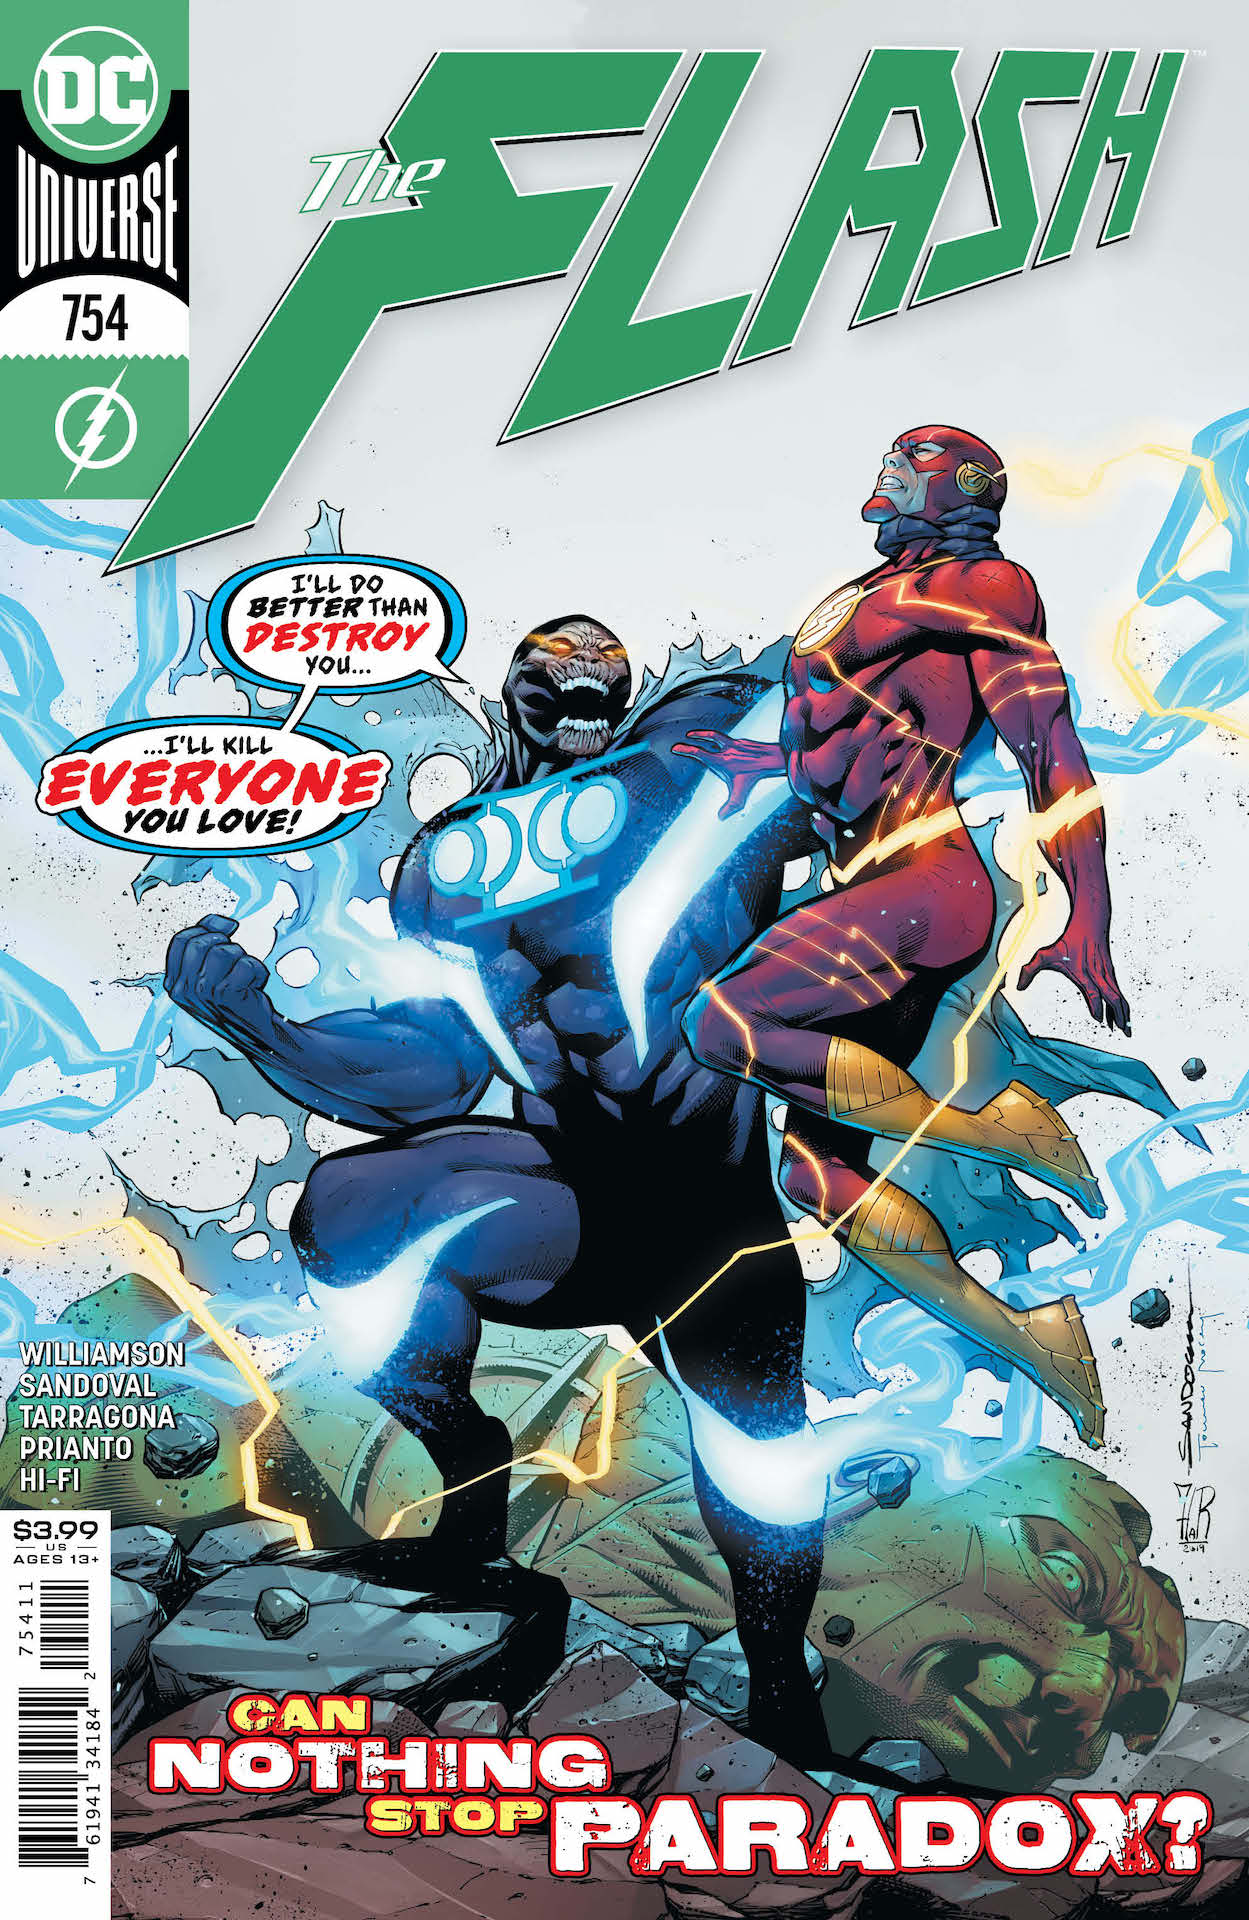 DC Preview: The Flash #754